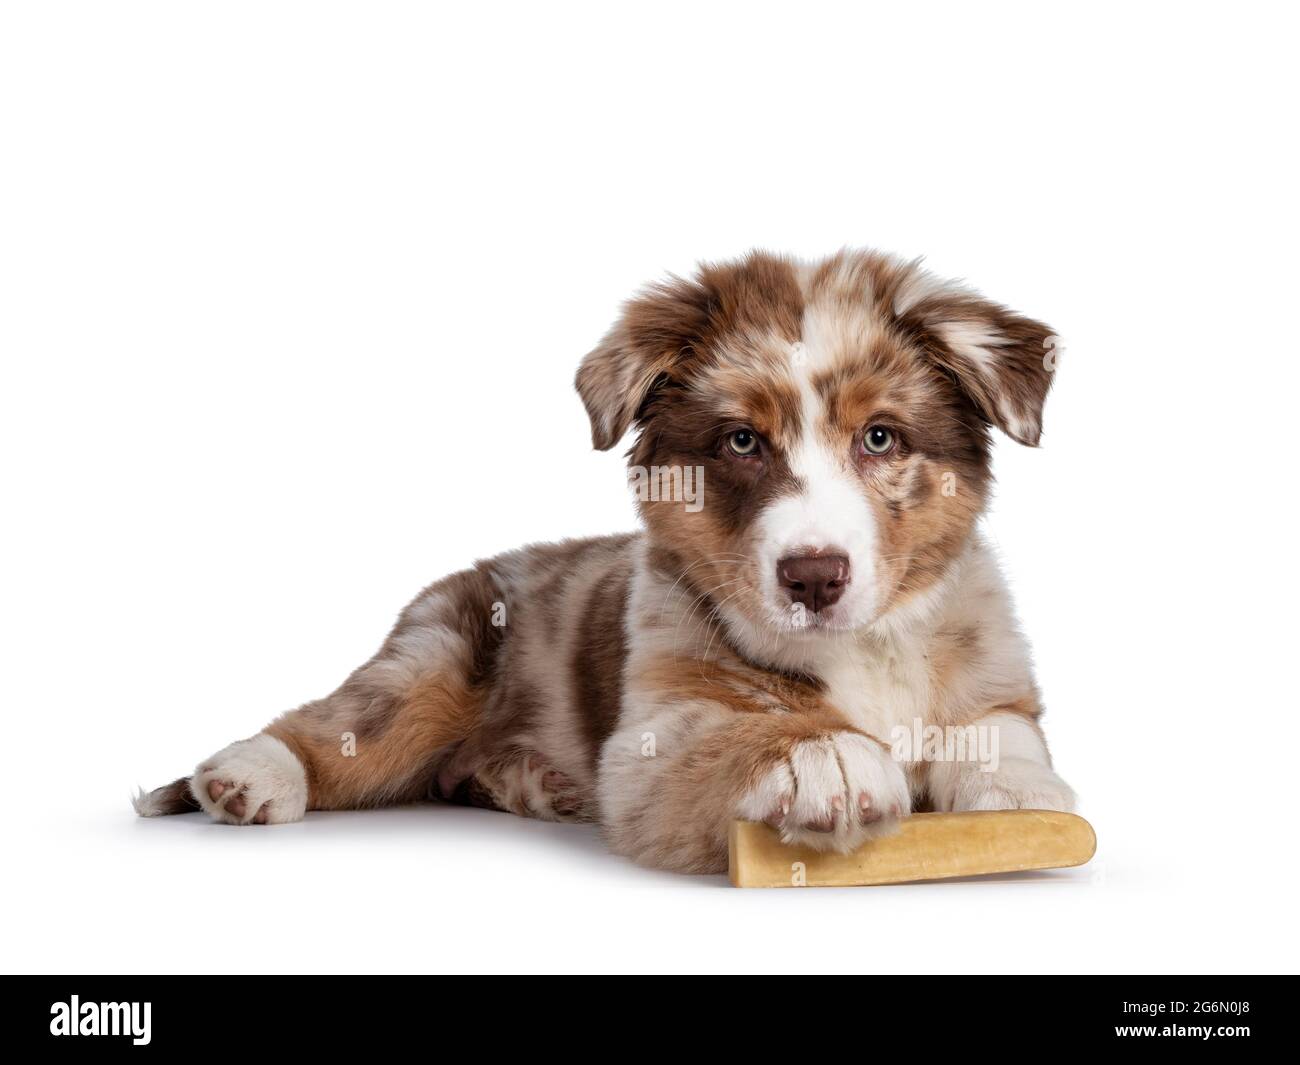 Red Merle White High Resolution Stock Photography and Images - Alamy